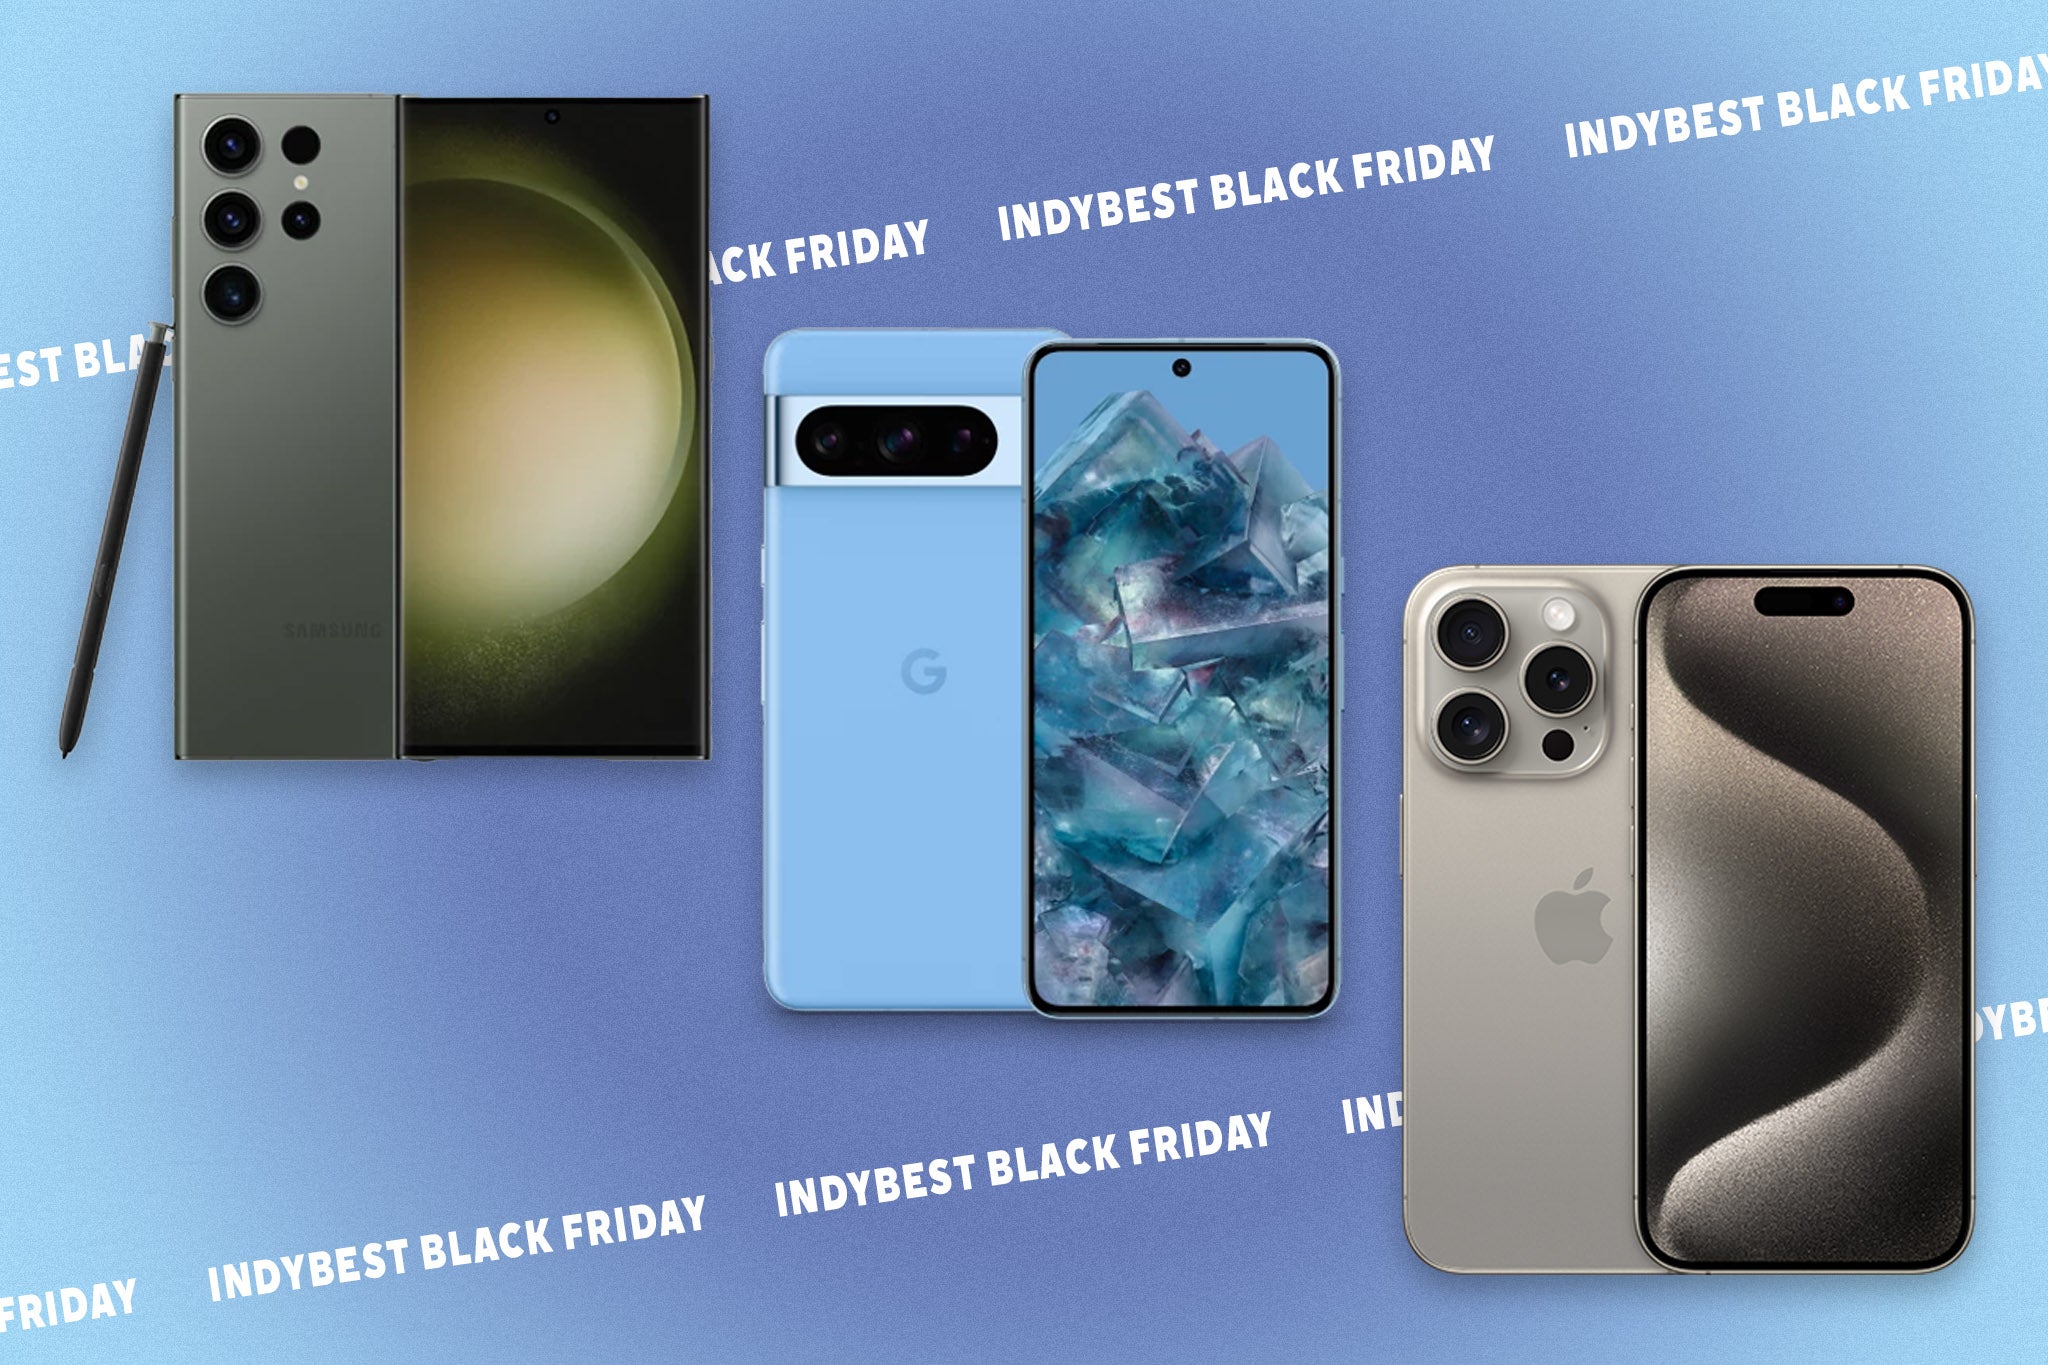 indybest, amazon, android, black friday, best black friday mobile phone deals on iphone, galaxy, pixel and more